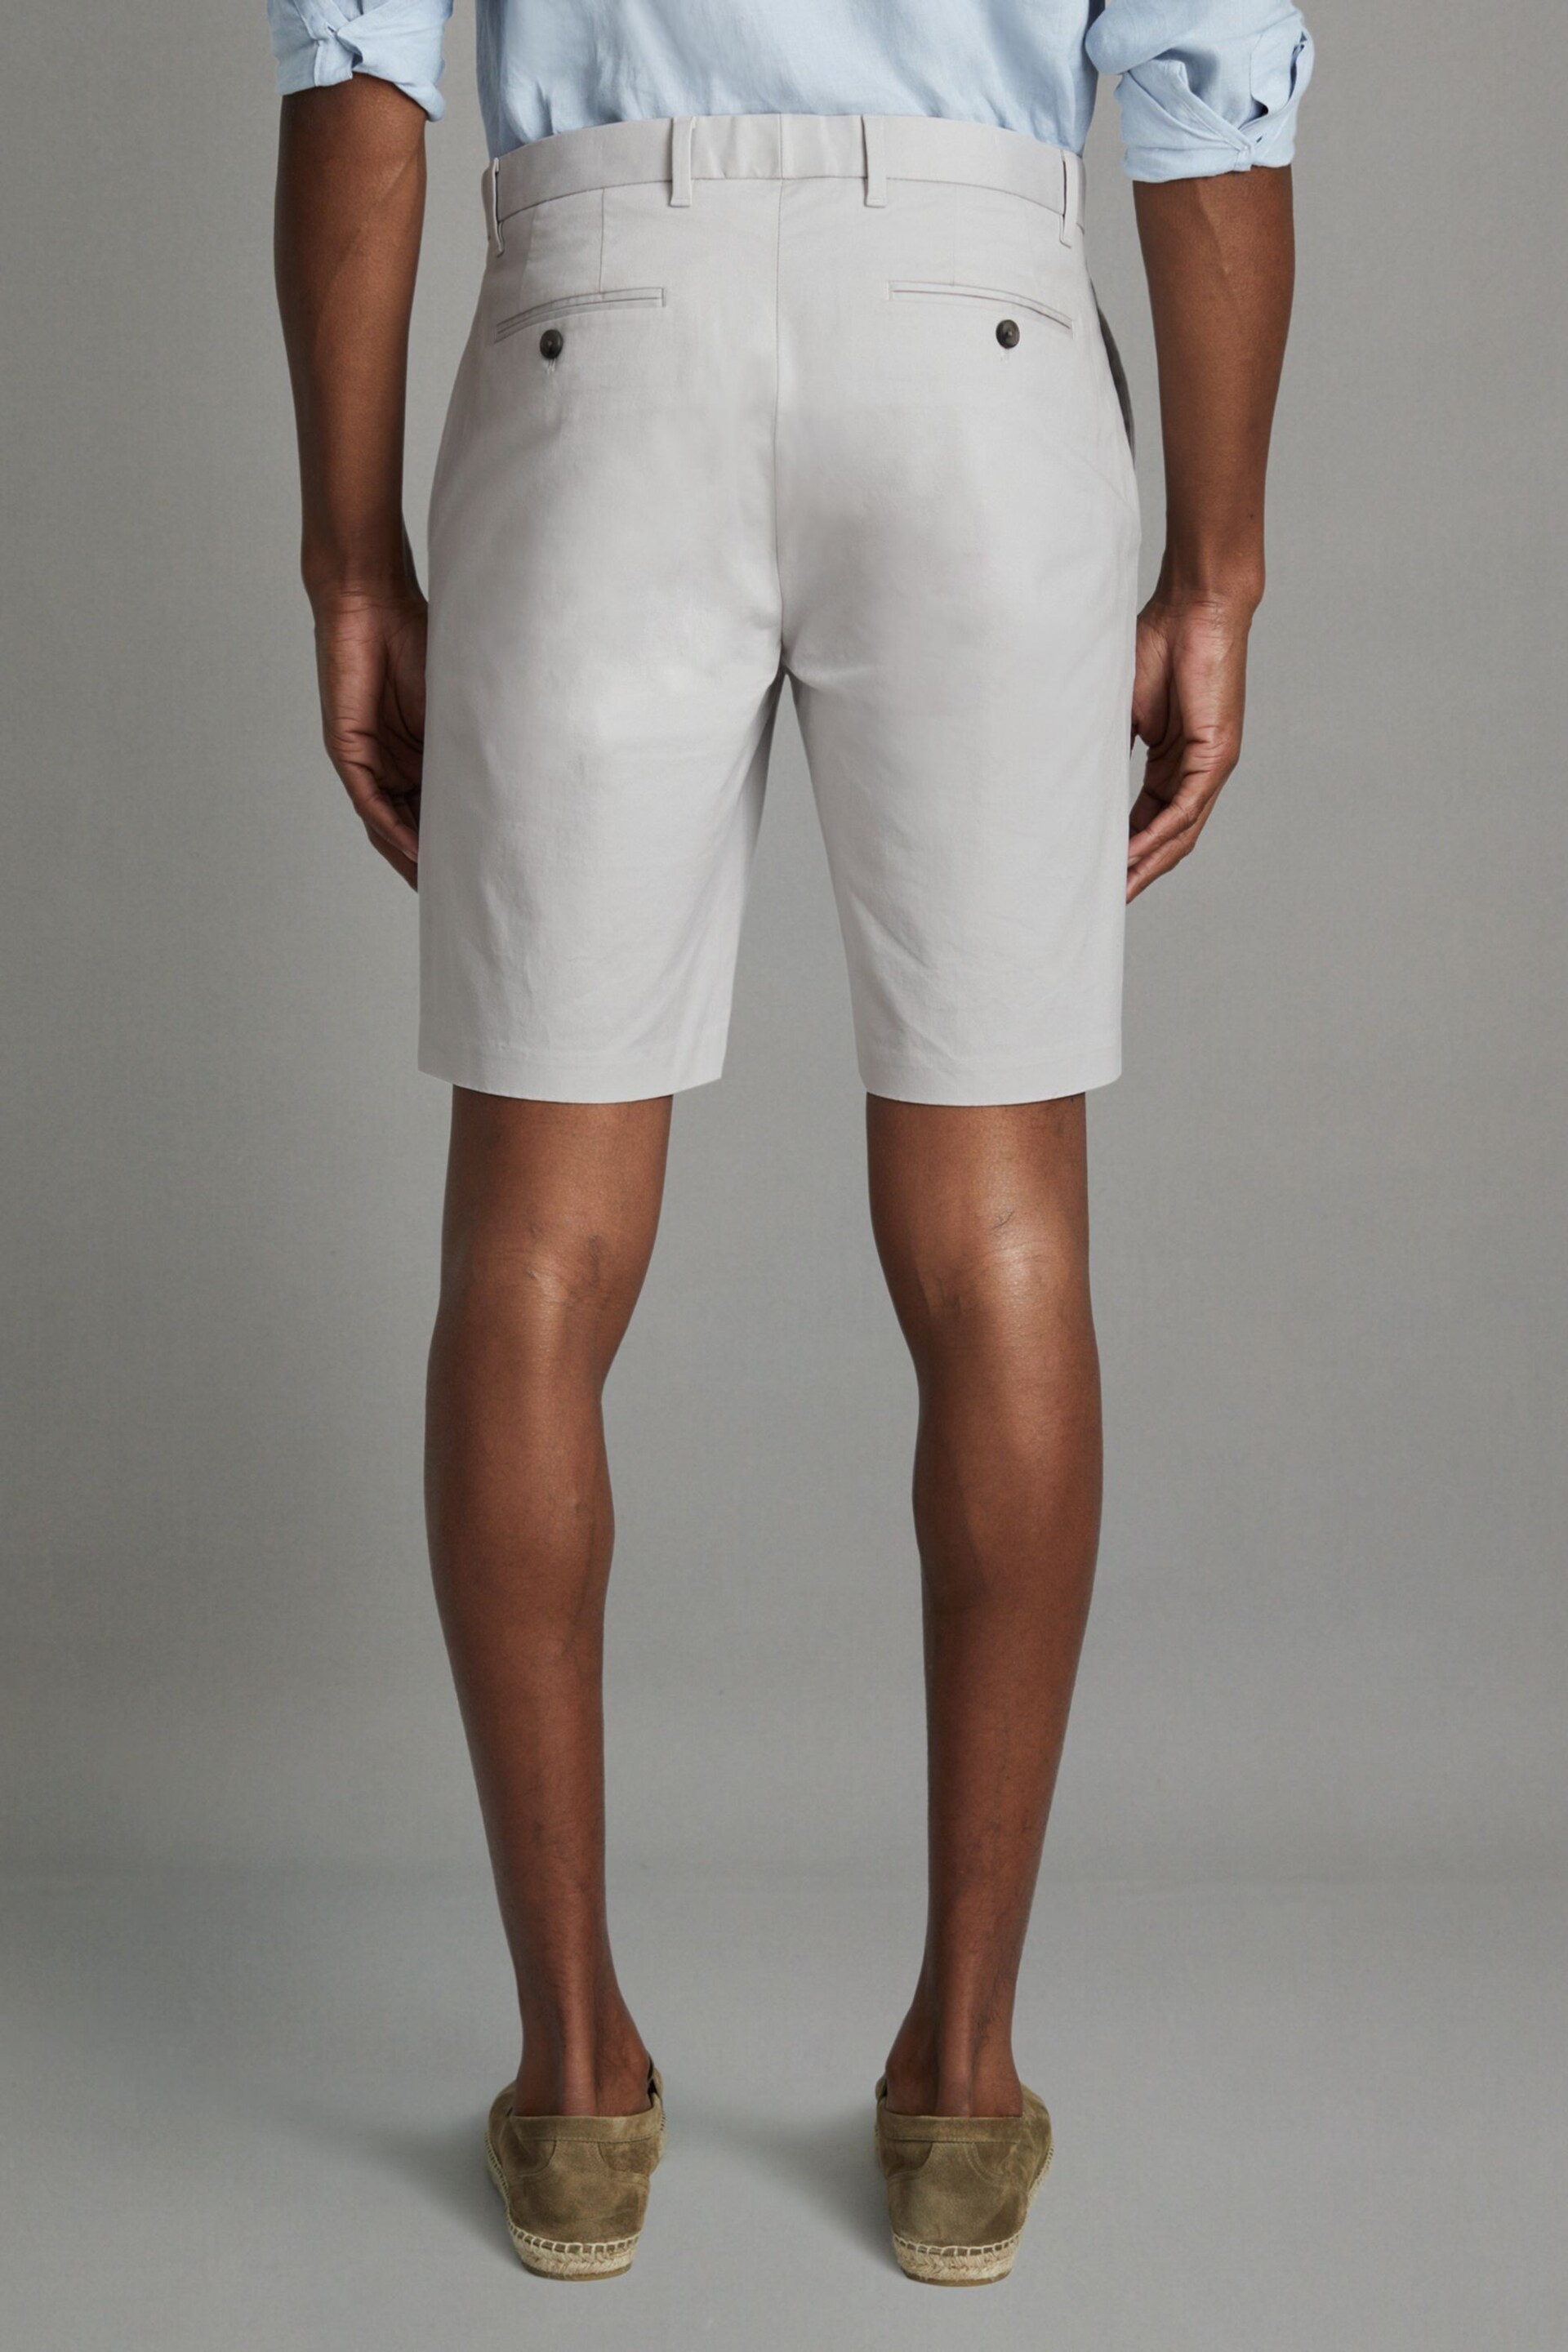 Reiss Ice Grey Wicket Modern Fit Cotton Blend Chino Shorts - Image 5 of 6